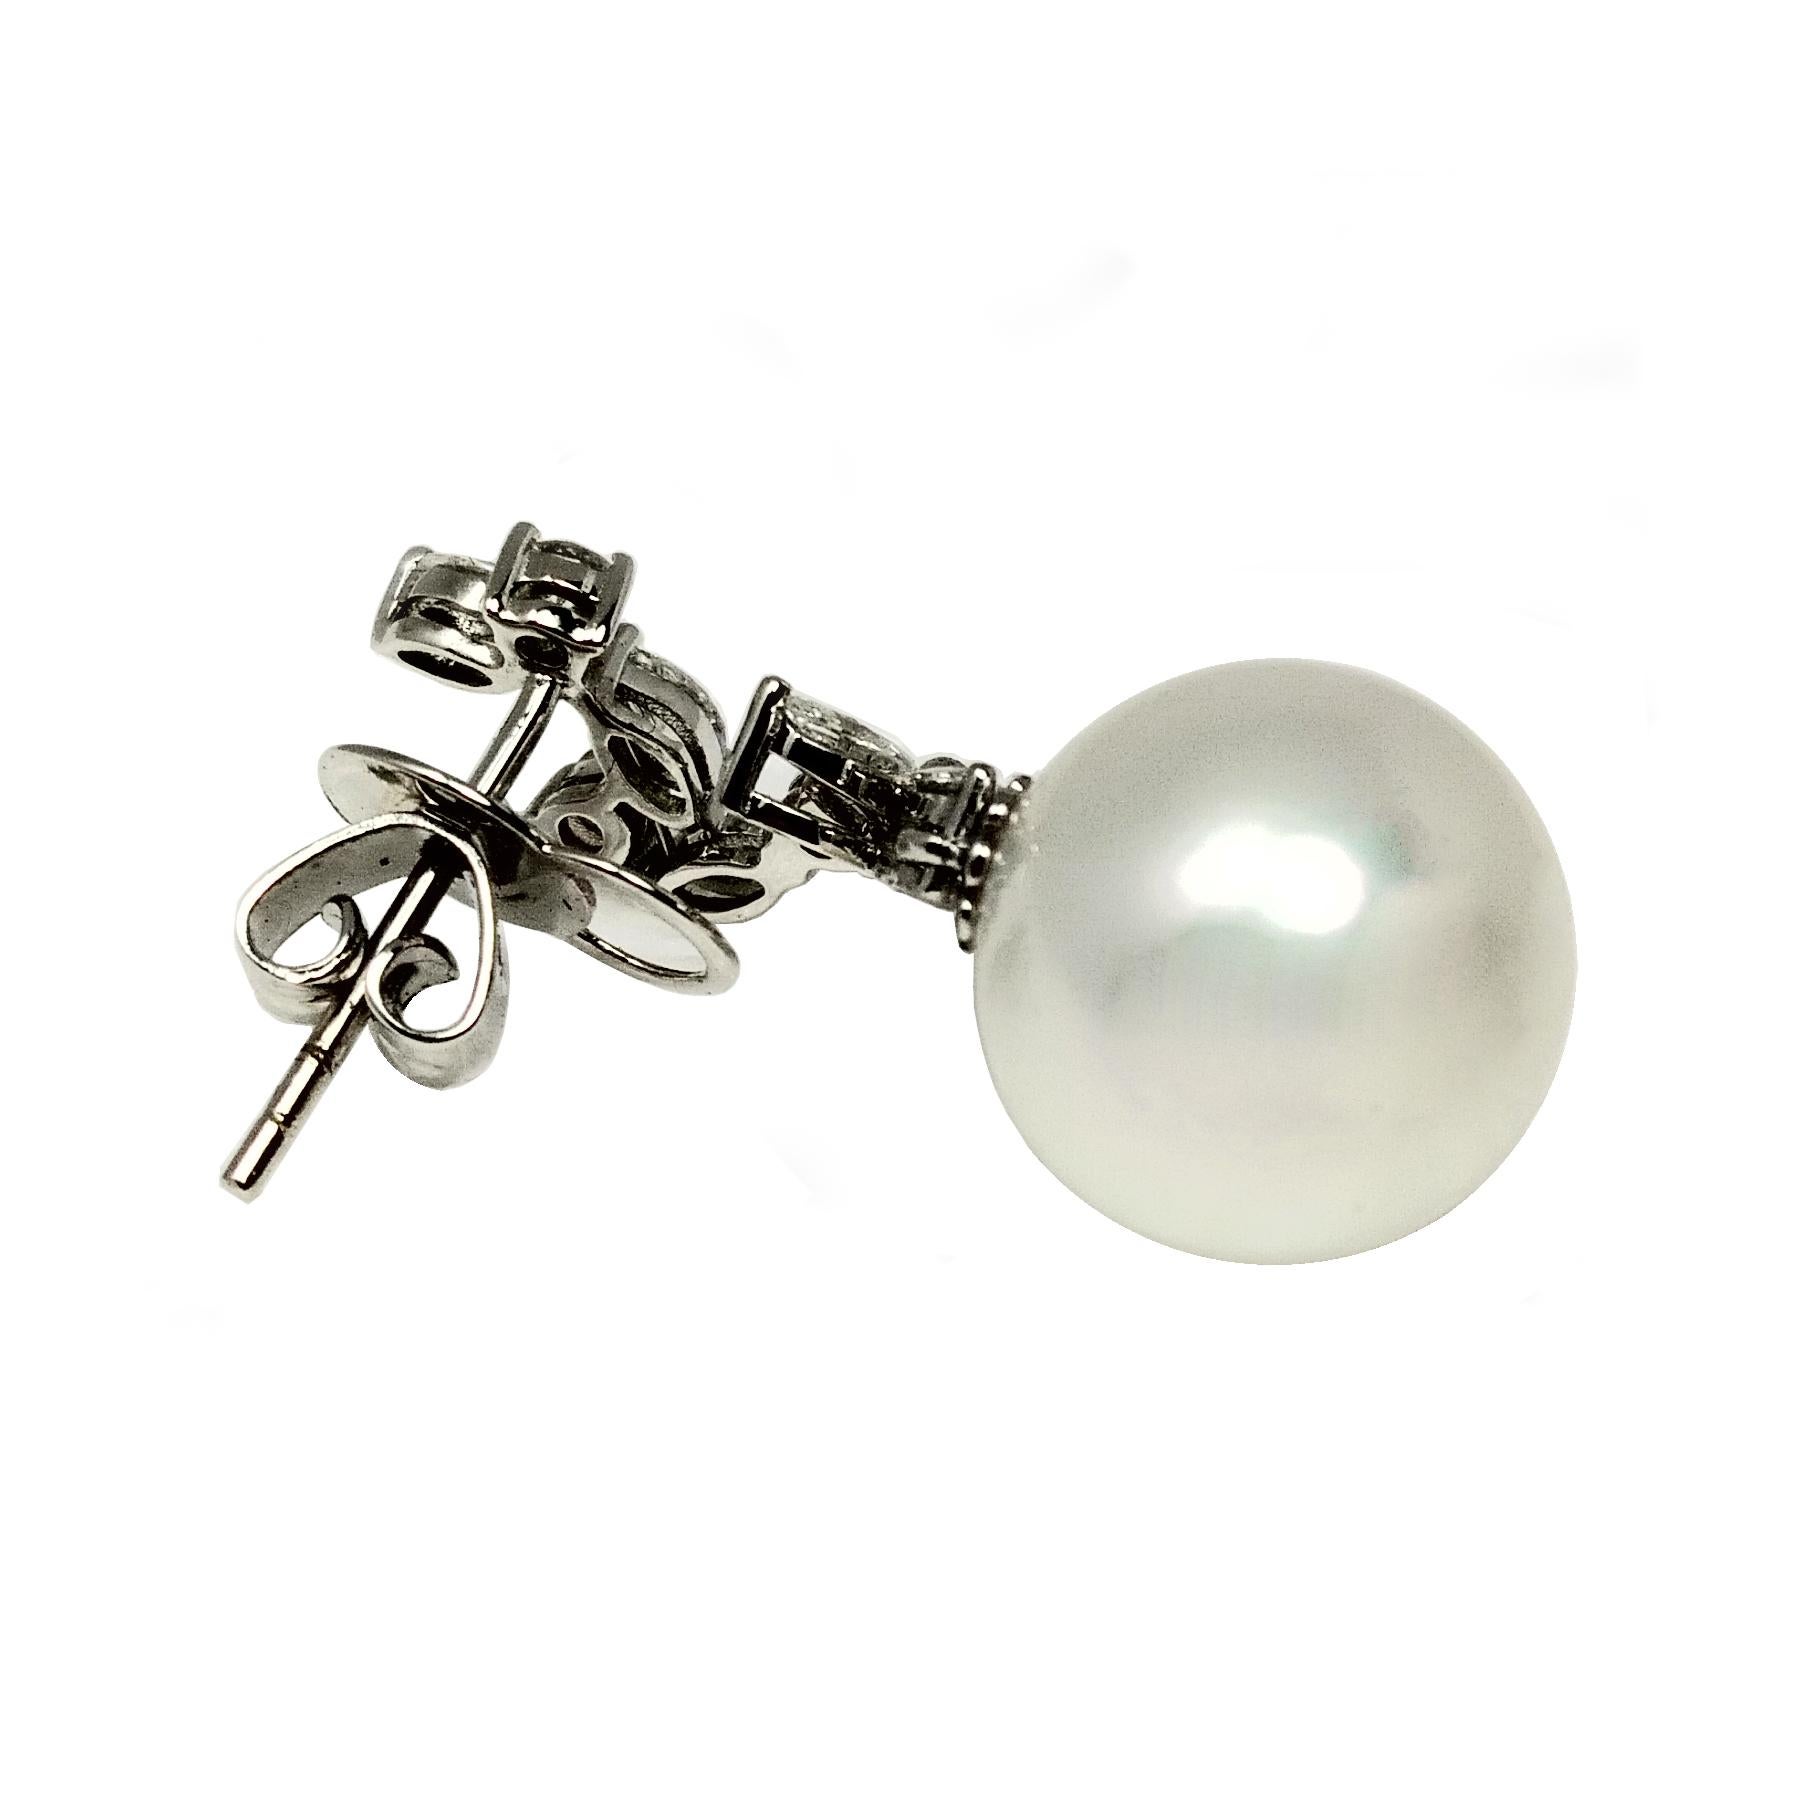 South sea pearl and diamond dangling earrings. Handcrafted cultured white south sea matching pearls linked with marquise and round brilliant cut diamonds in asymmetrical dangling design in 18 karat white gold with push back butterfly post.

Pearl: